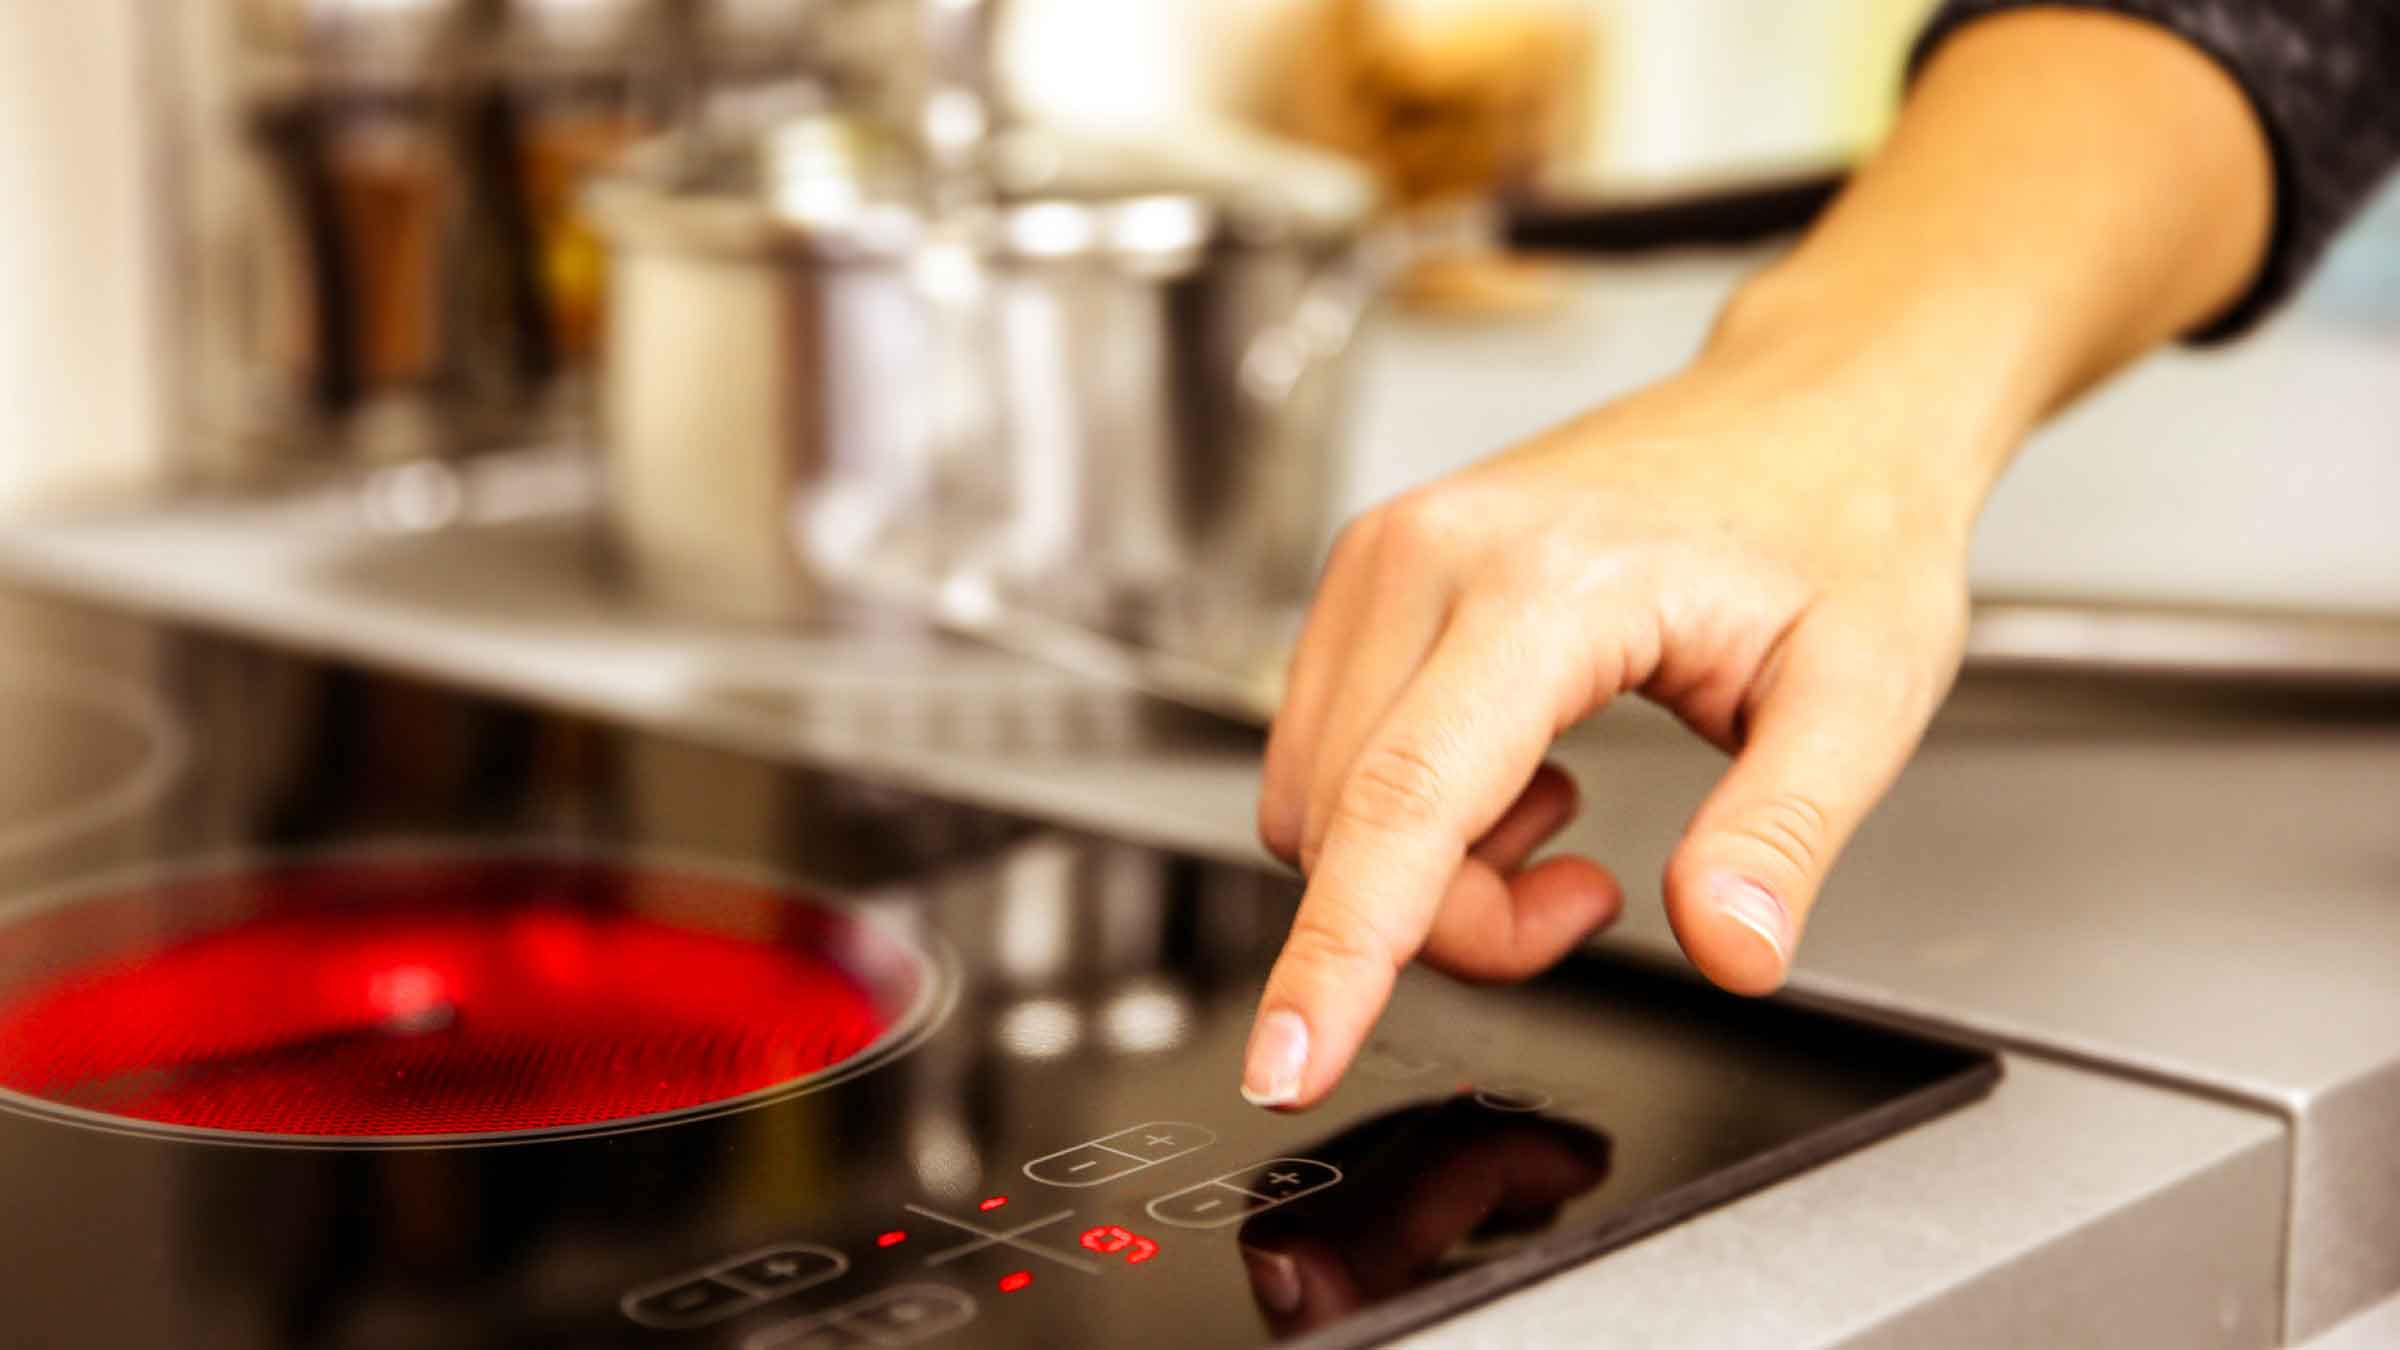 Switching on an electric stove top